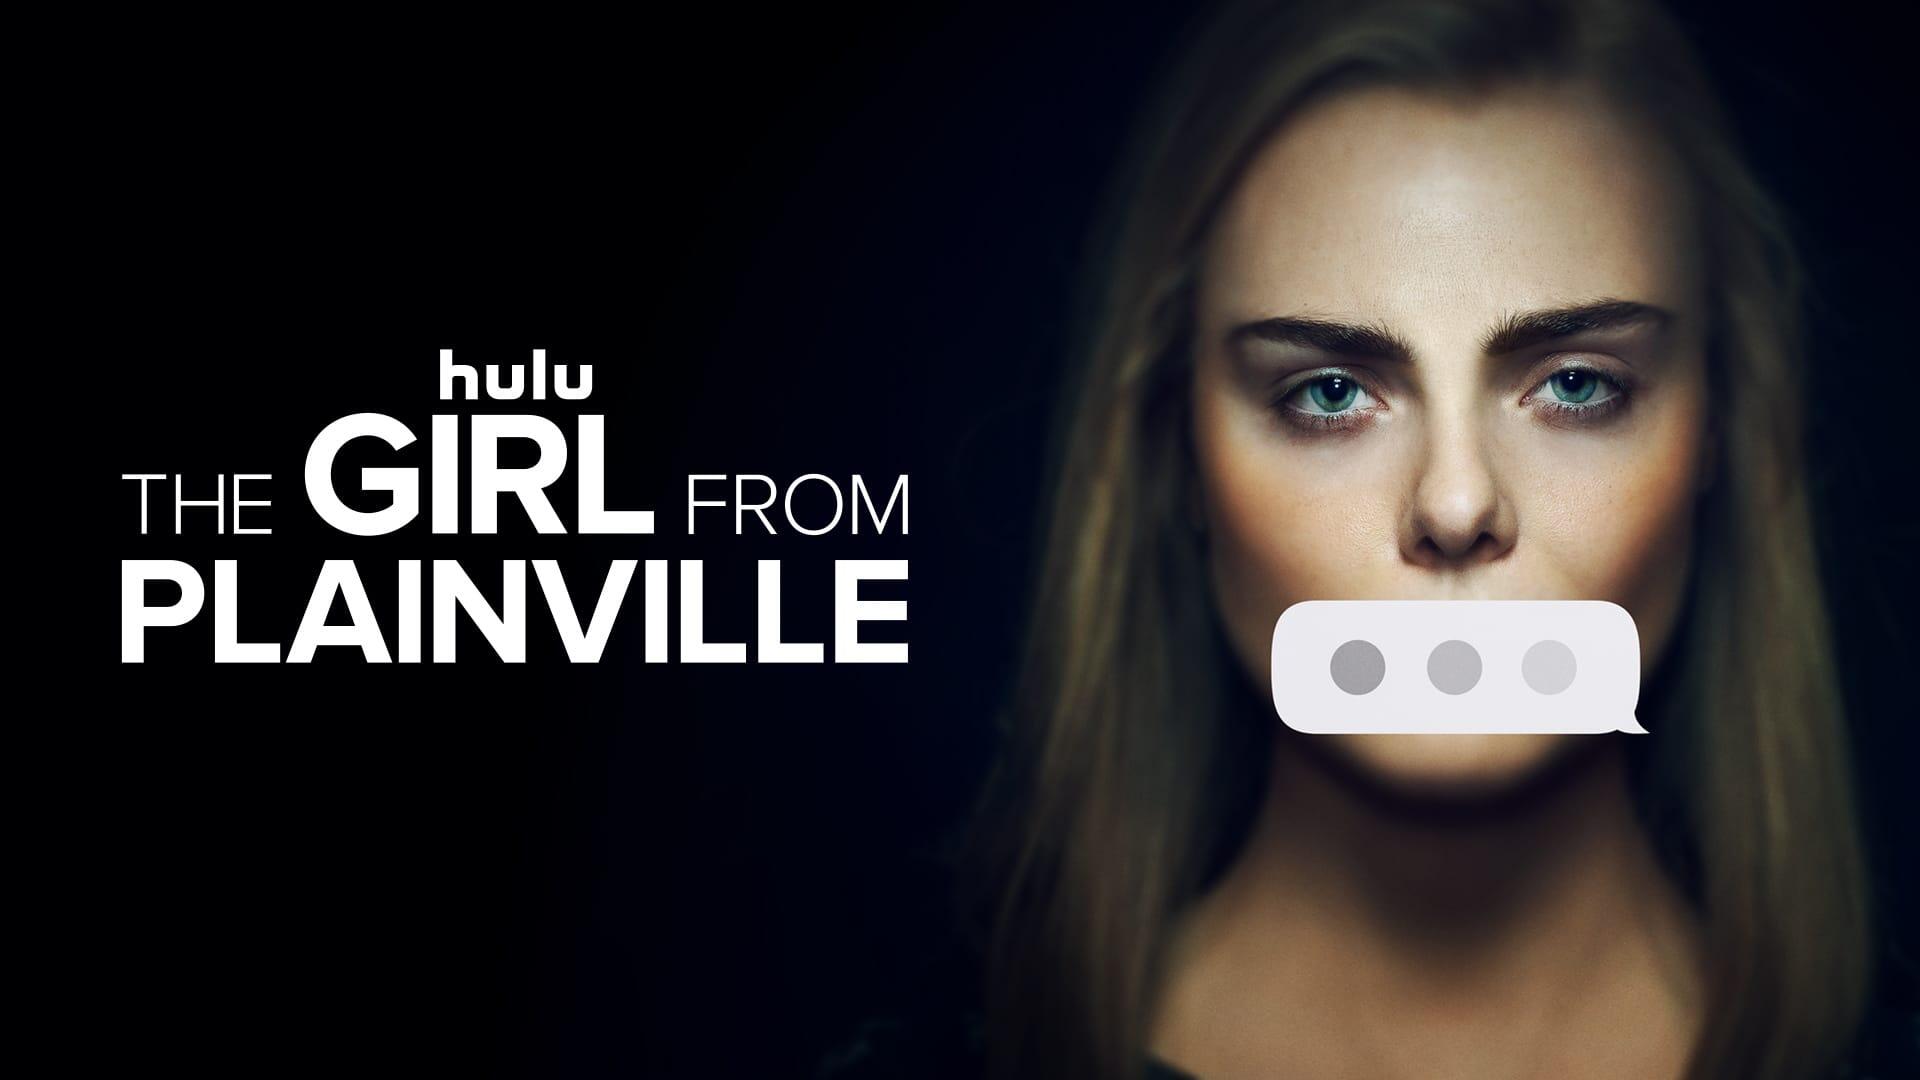 The Girl From Plainville -- “The Girl From Plainville” is inspired by the true story of Michelle Carter’s unprecedented “texting-suicide” case. Based on the Esquire article of the same name by Jesse Barron, the limited series explores Carter’s relationship with Conrad Roy III and the events that led to his death and, later, her conviction of involuntary manslaughter. Michelle (Elle Fanning), shown. (Courtesy of Hulu)